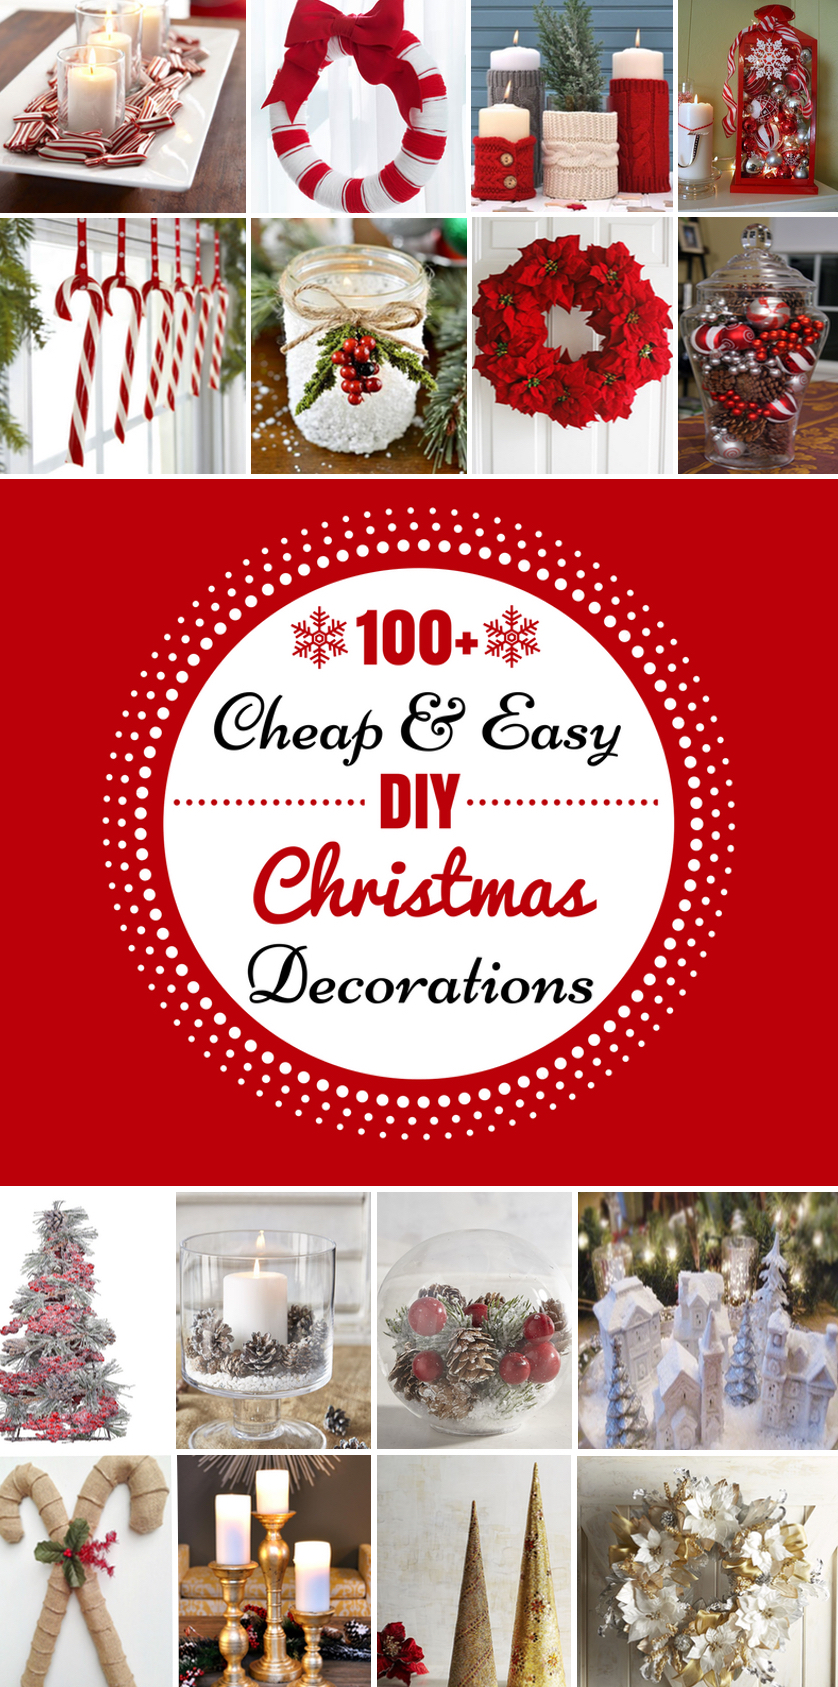 100 Cheap & Easy DIY Christmas Decorations - Prudent Penny Pincher